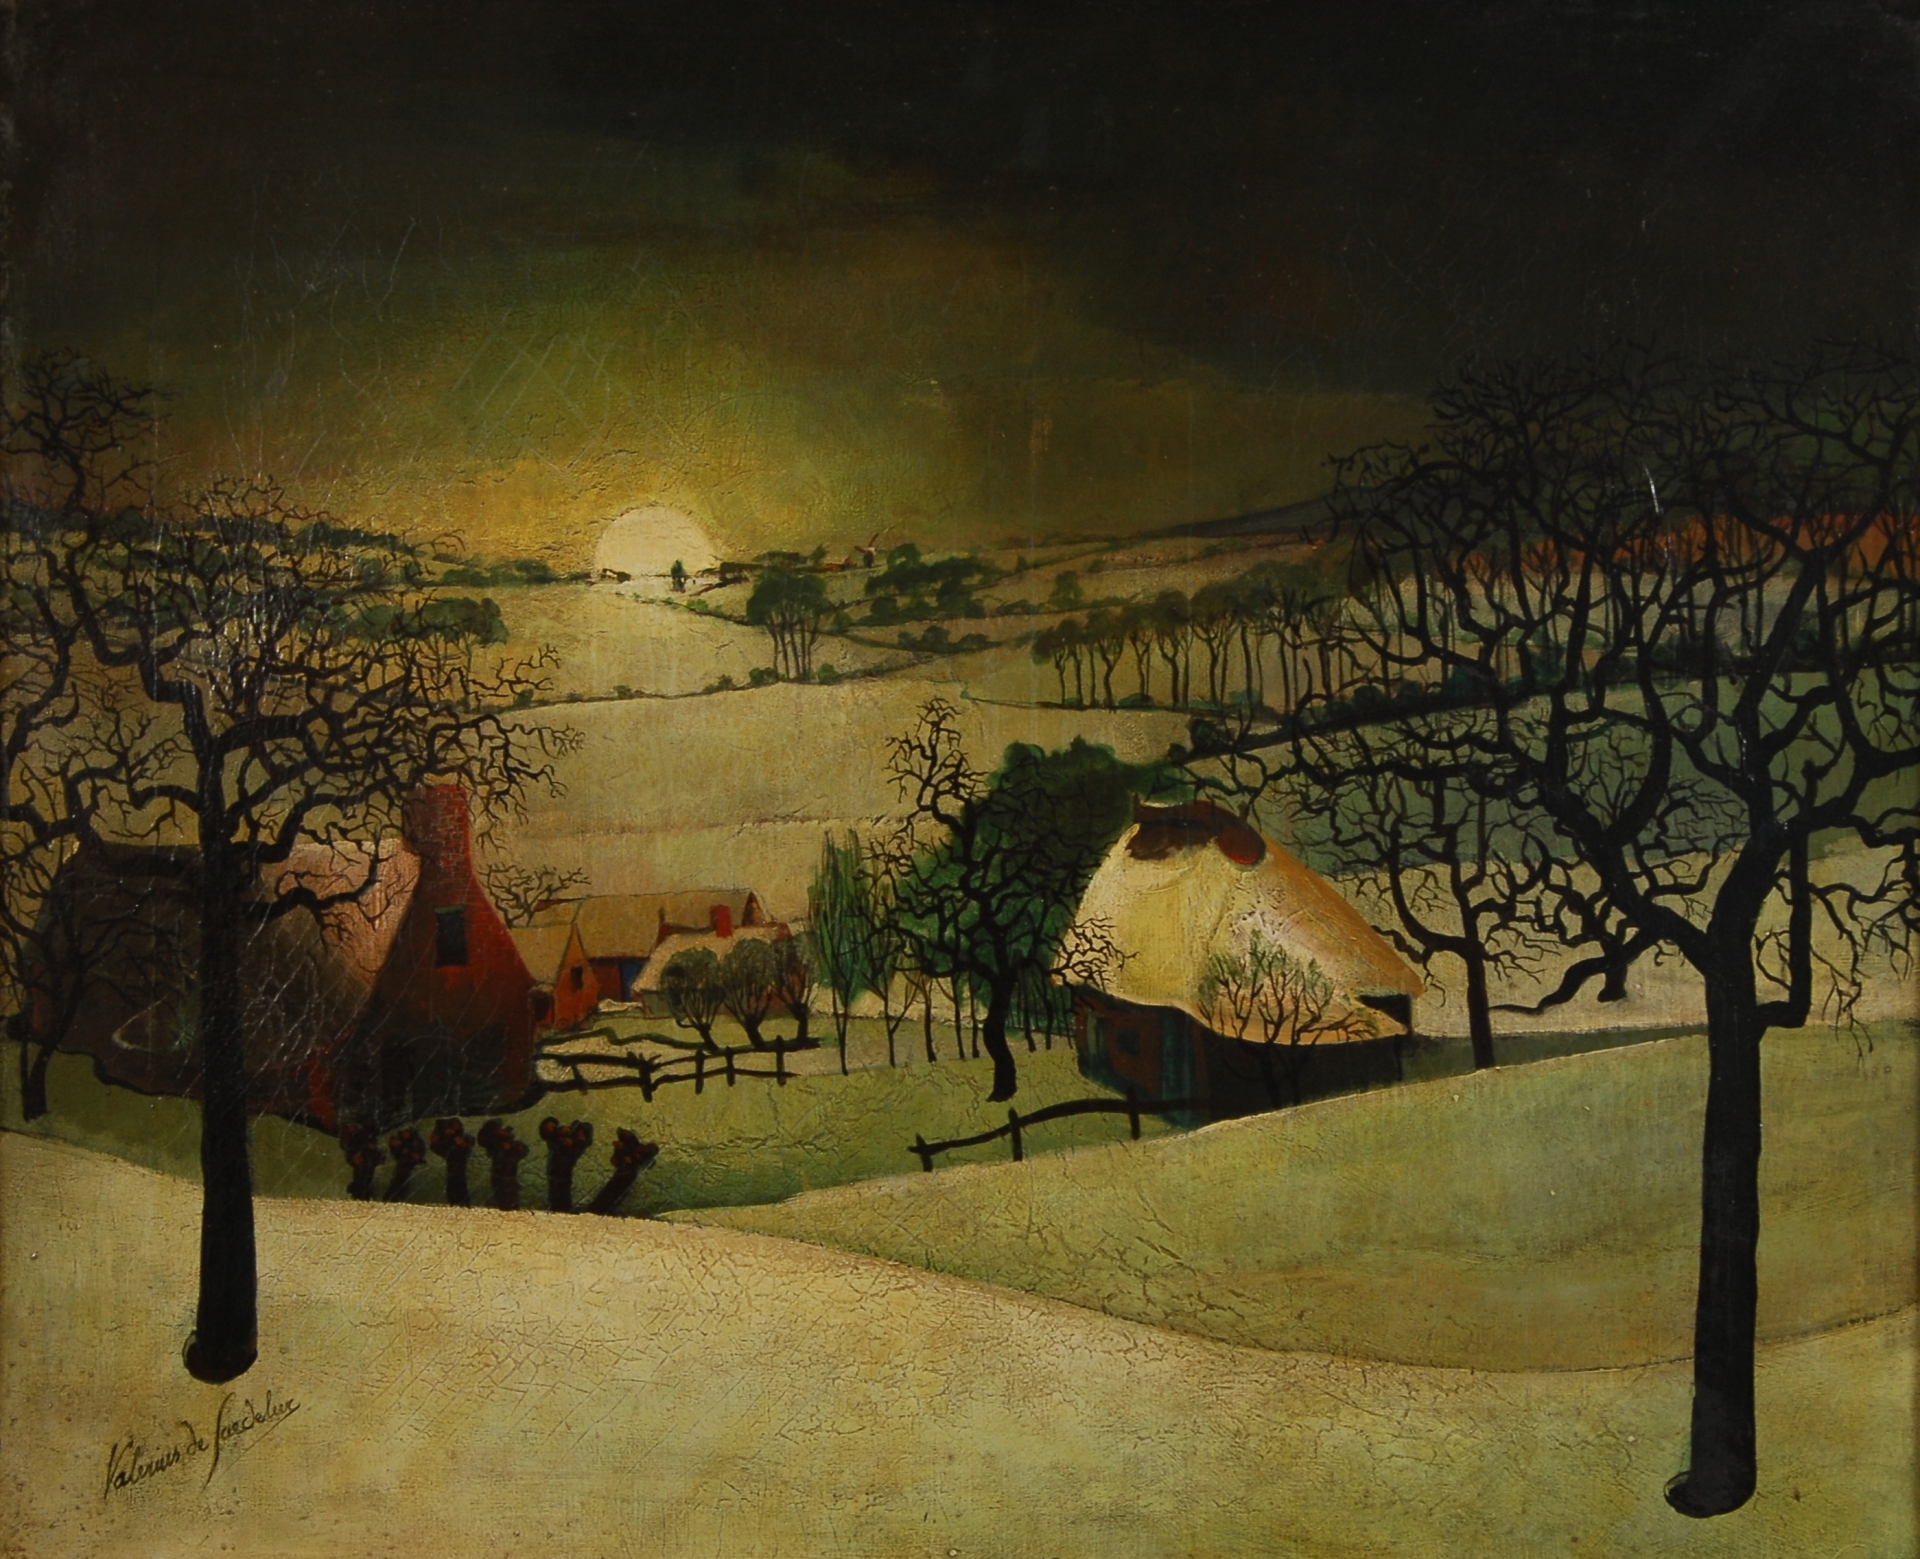 Artwork by Valerius de Saedeleer, Paysage d´hiver, Made of Oil on canvas